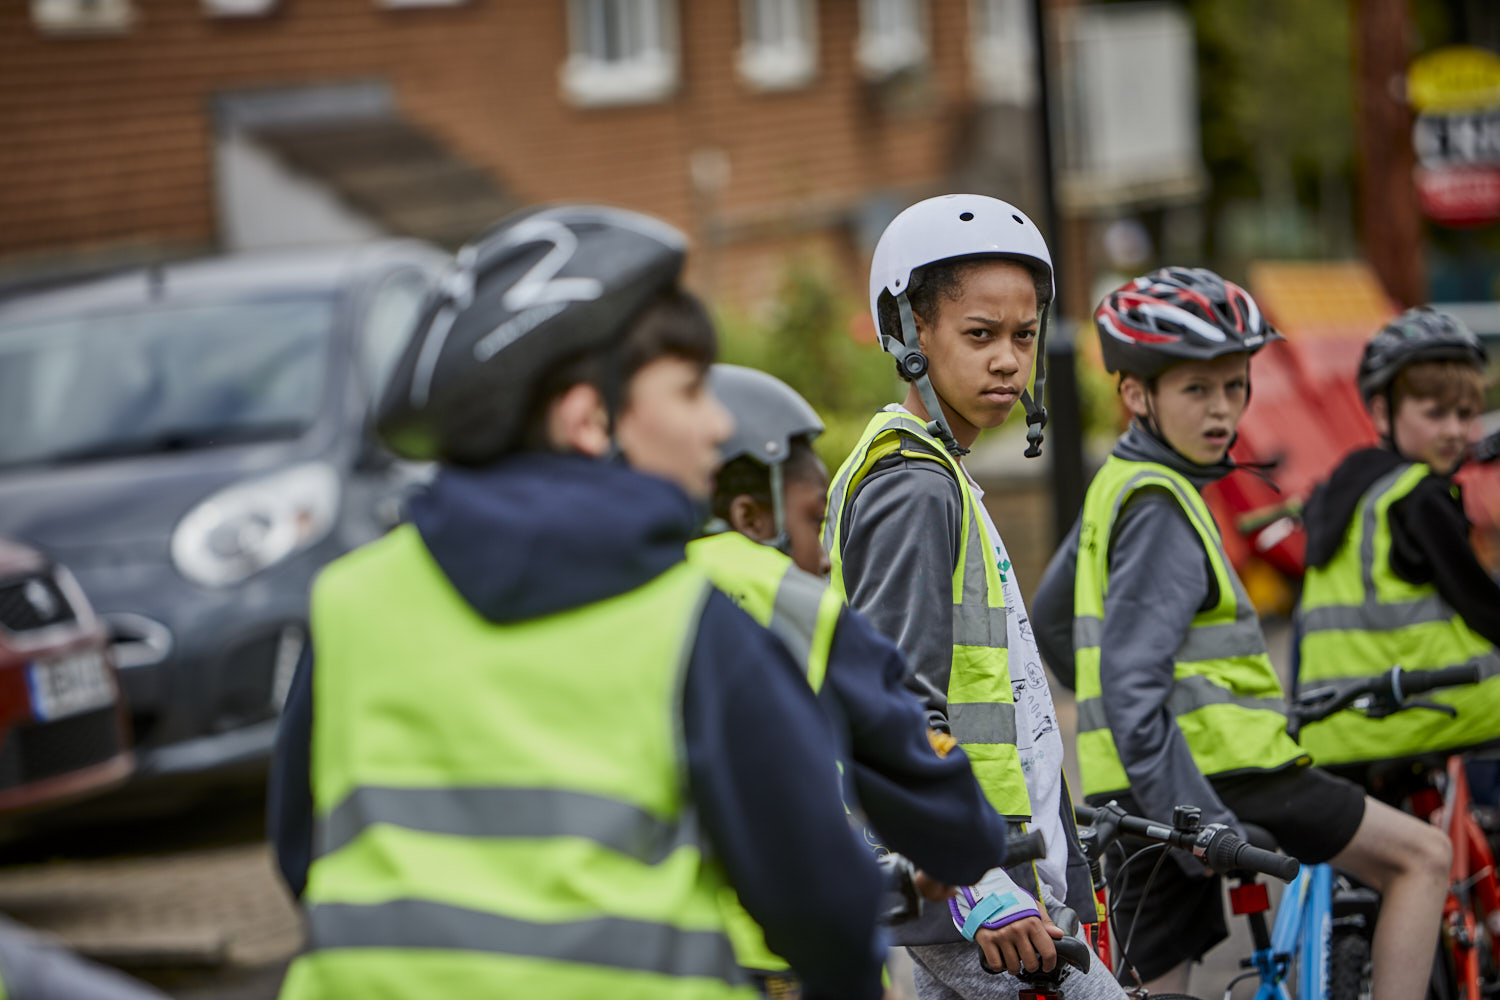 Bikeability trainees on a ride